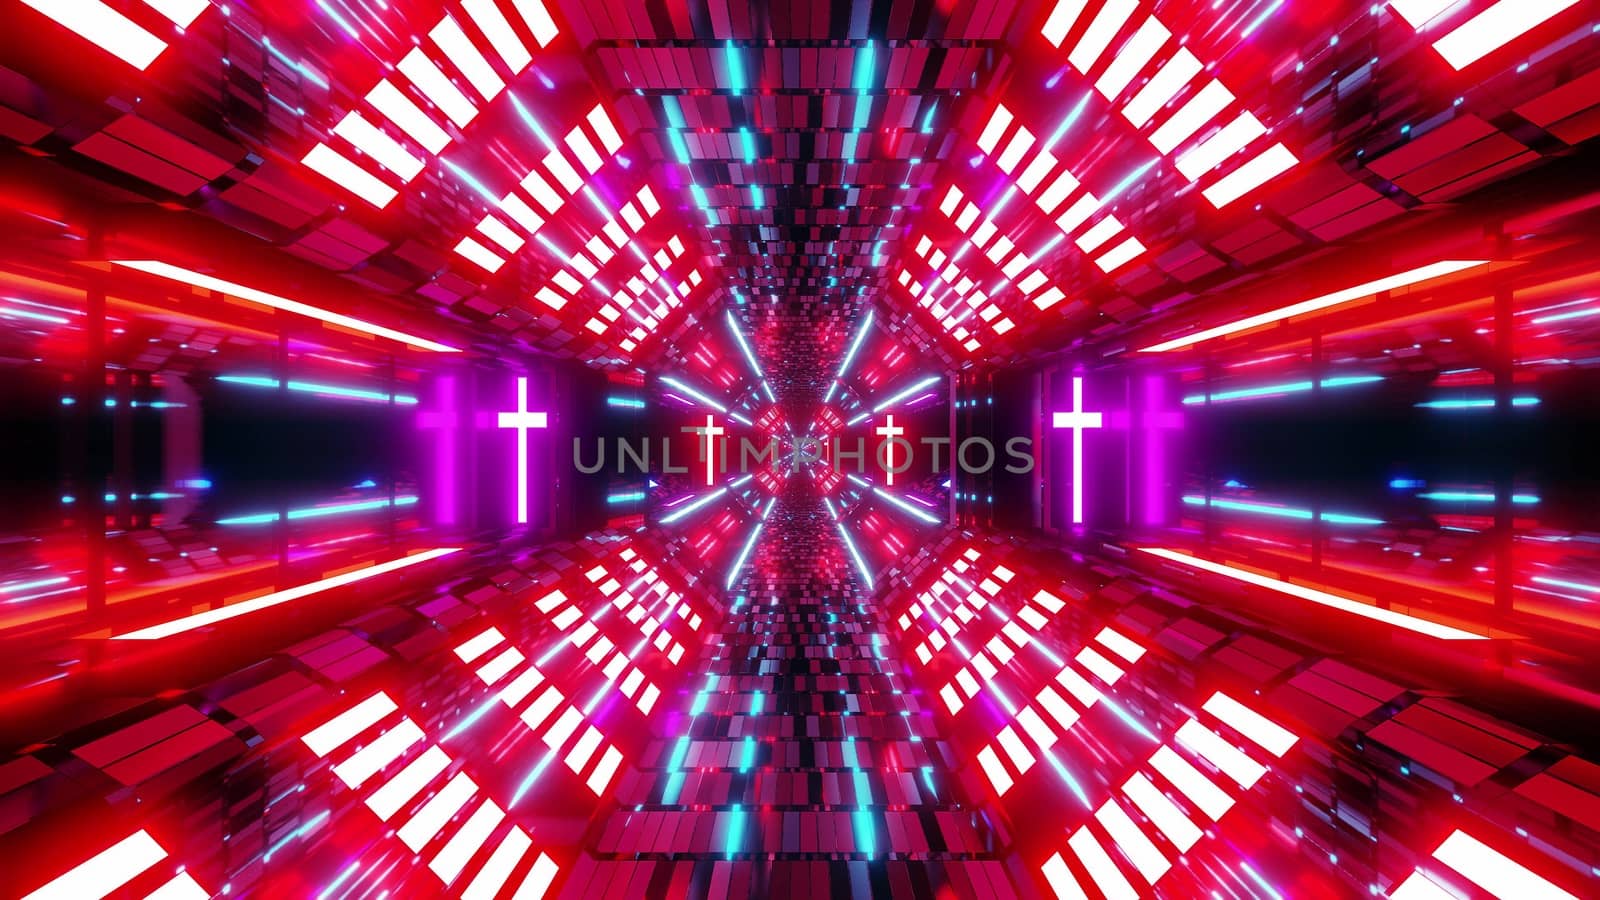 glowing futuristic scifi tunnel corridor with holy glowing christian cross symbol 3d illustration background wallpaper, nice textured sci-fi hangar 3d rendering design